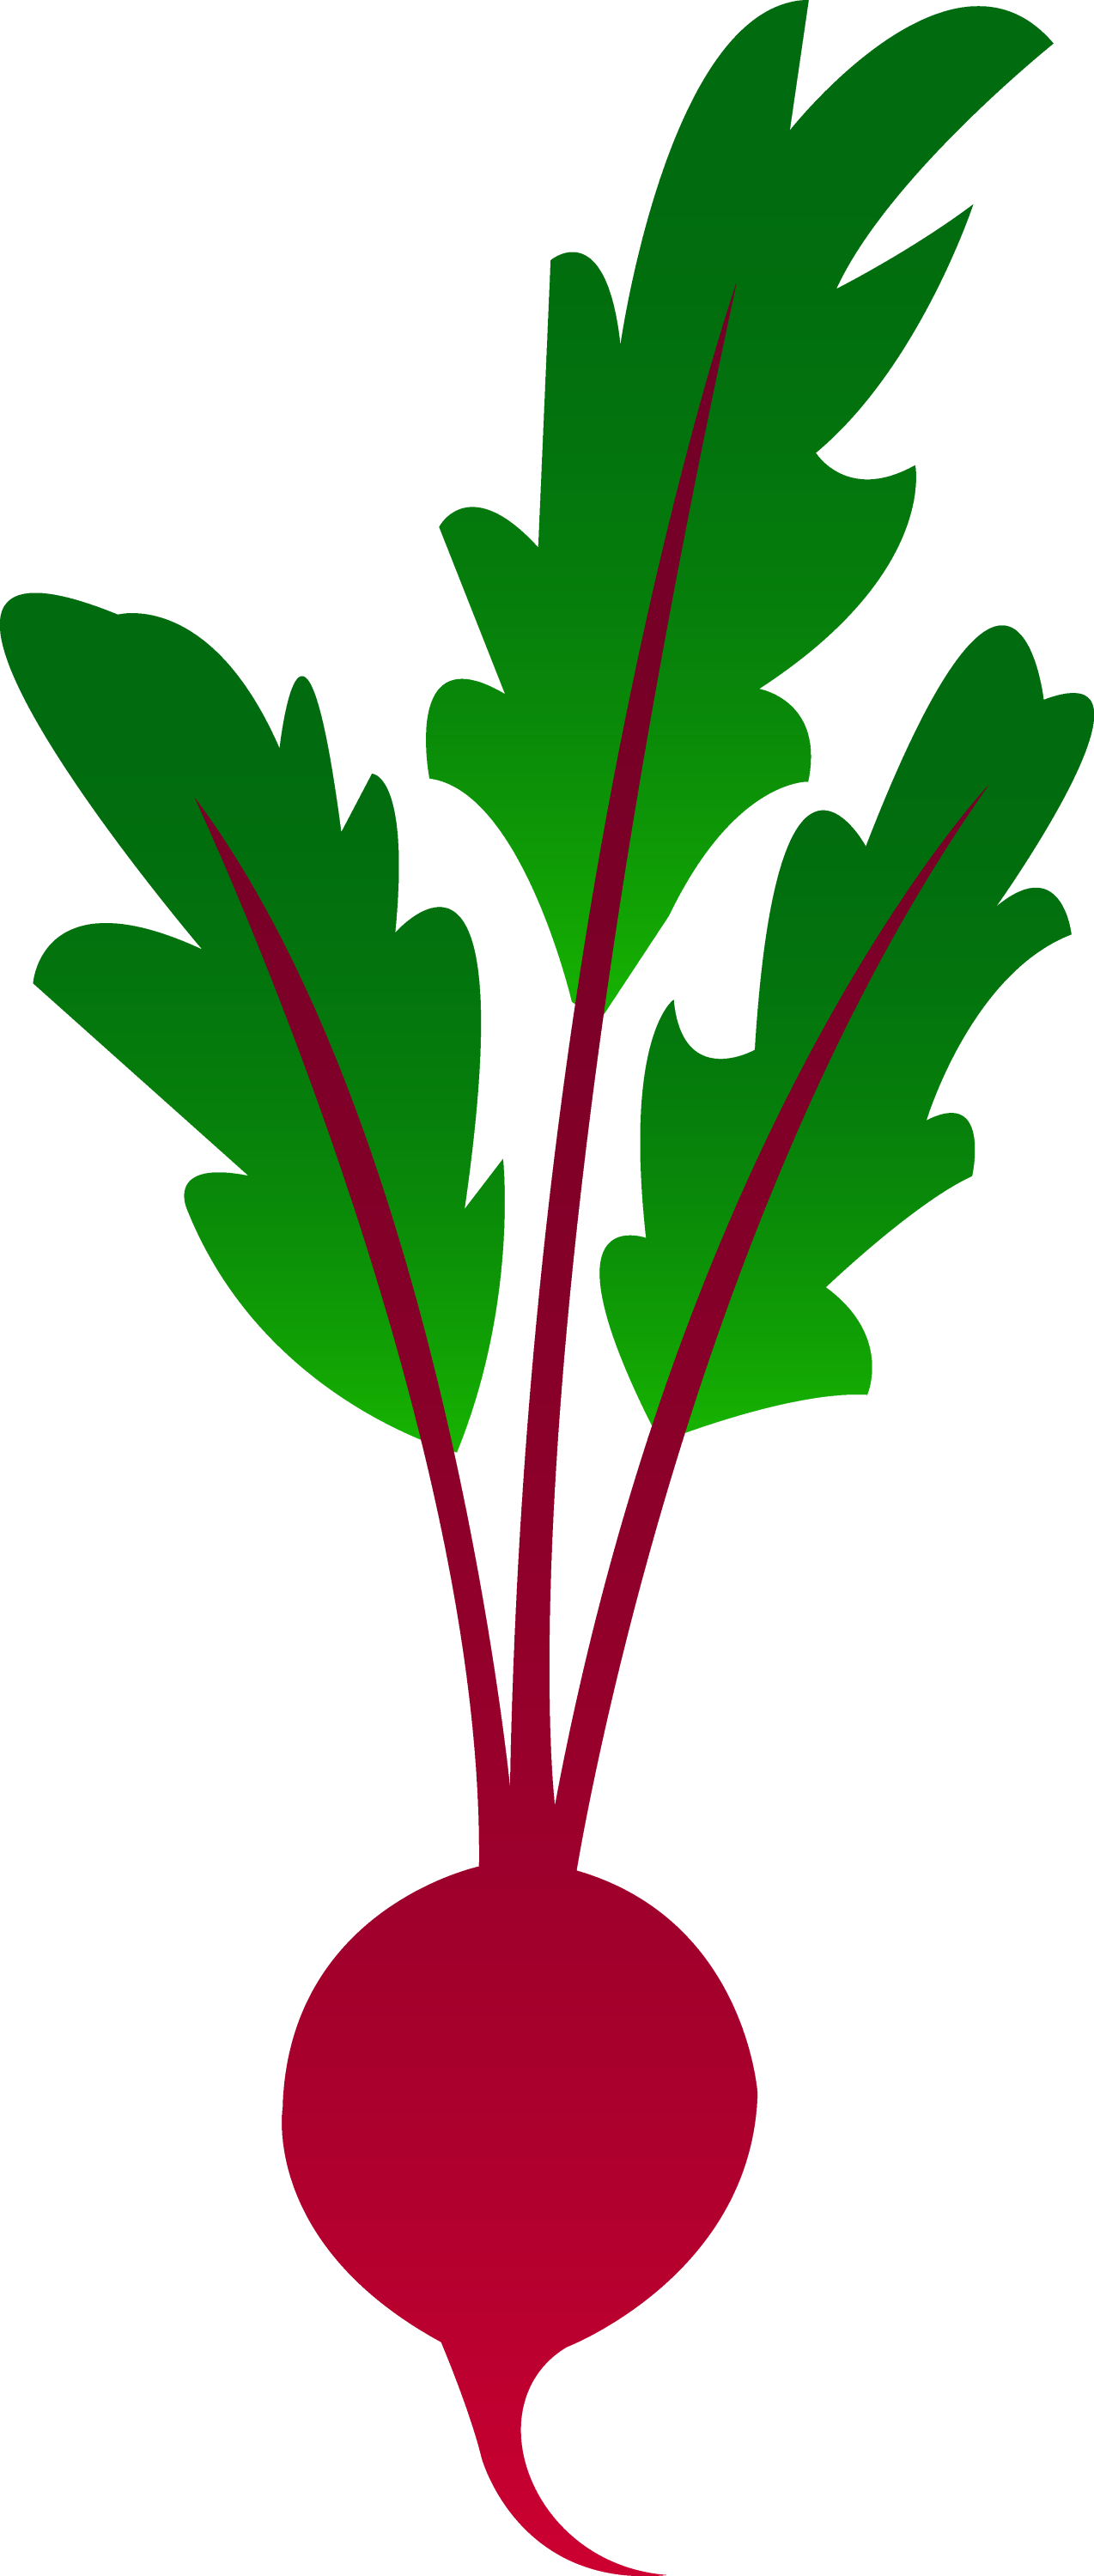 free clipart beets - photo #1